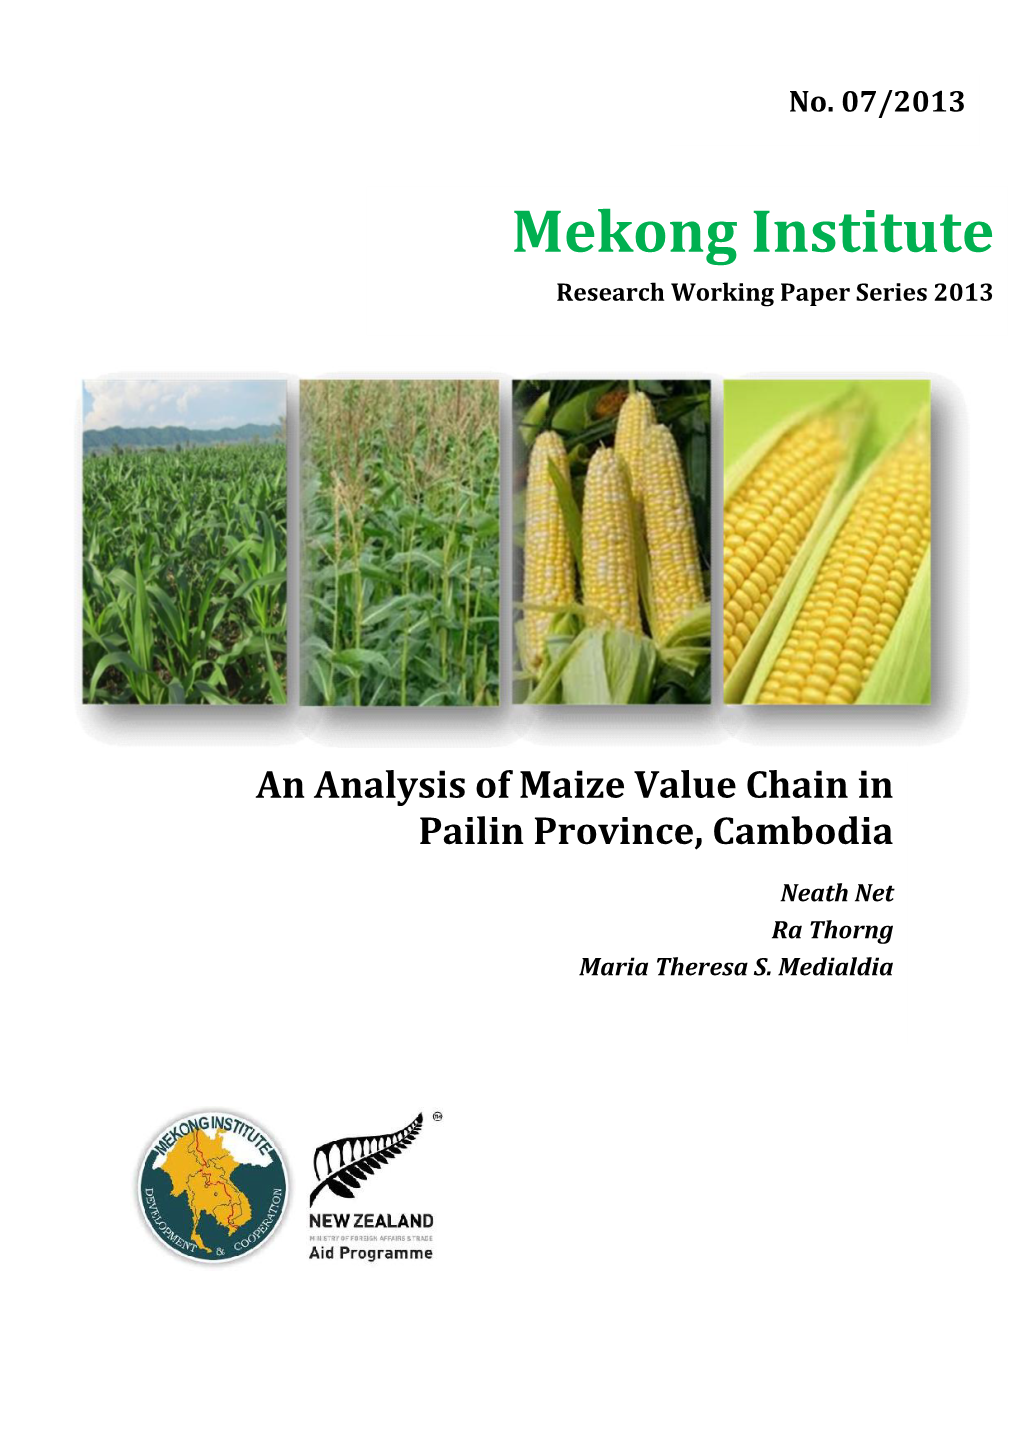 An Analysis of Maize Value Chain in Pailin Province, Cambodia